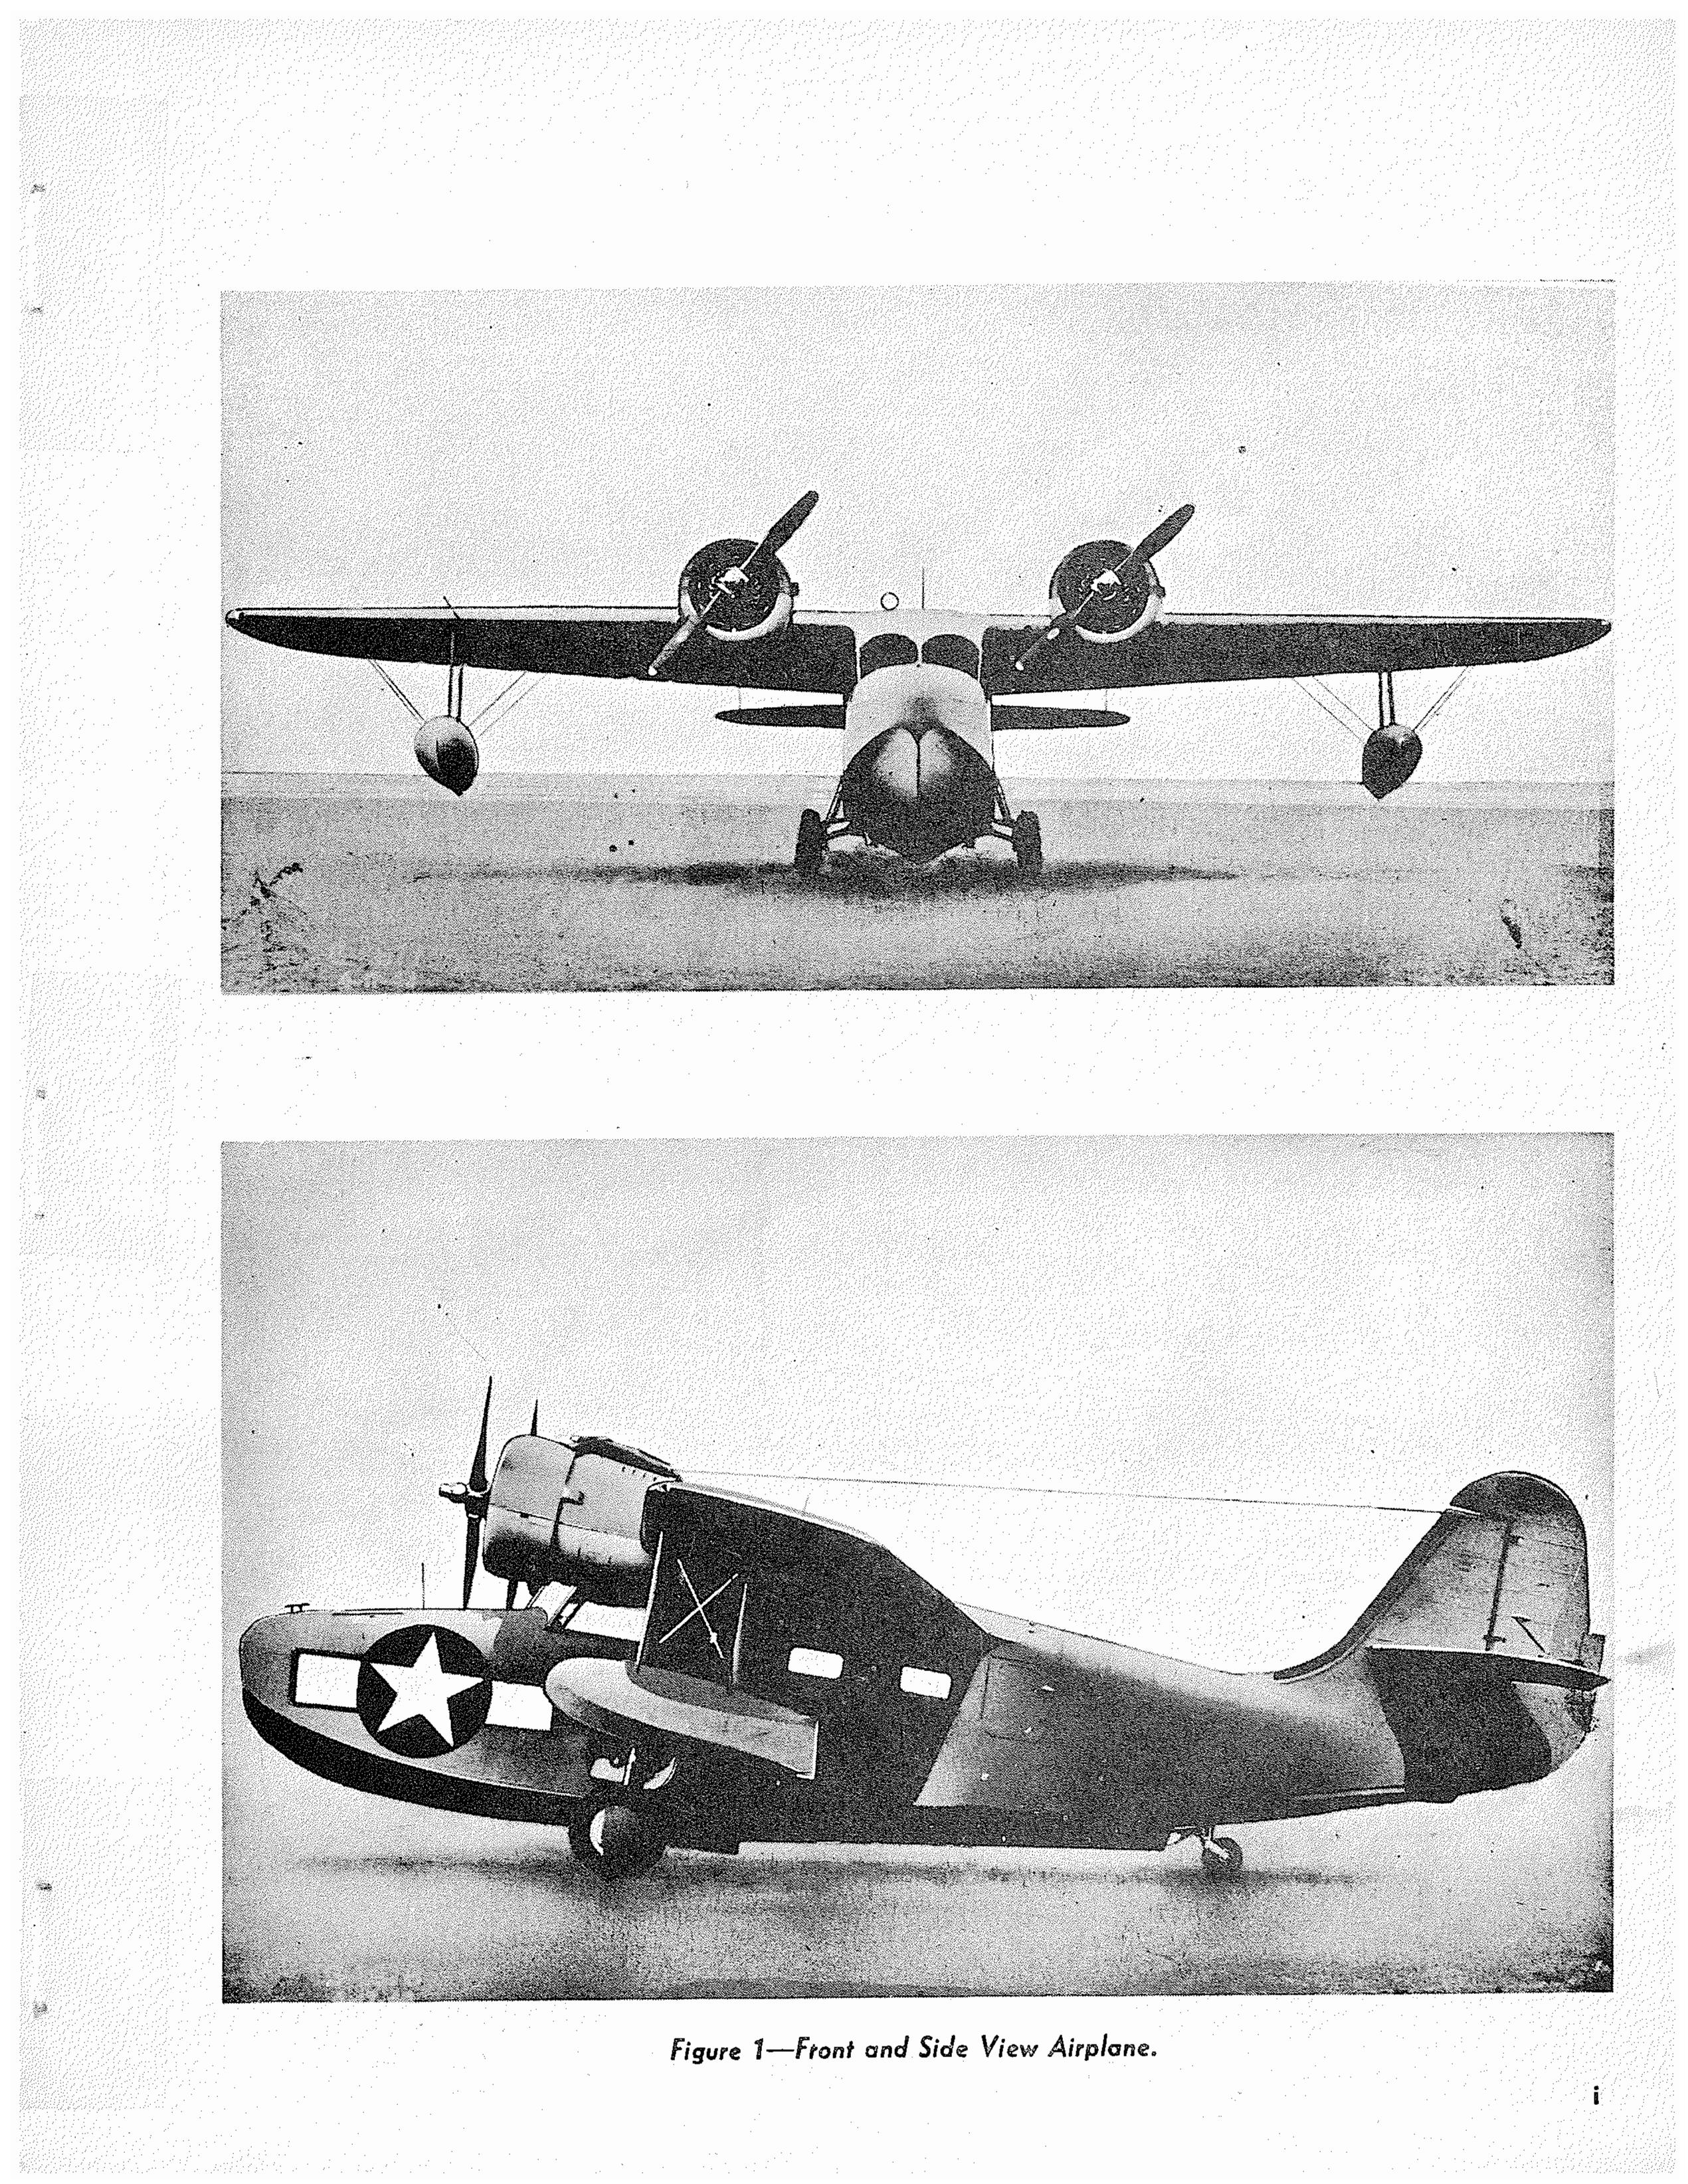 Sample page 3 from AirCorps Library document: Service Manual for Grumman Goose Model G-21A (JRF)